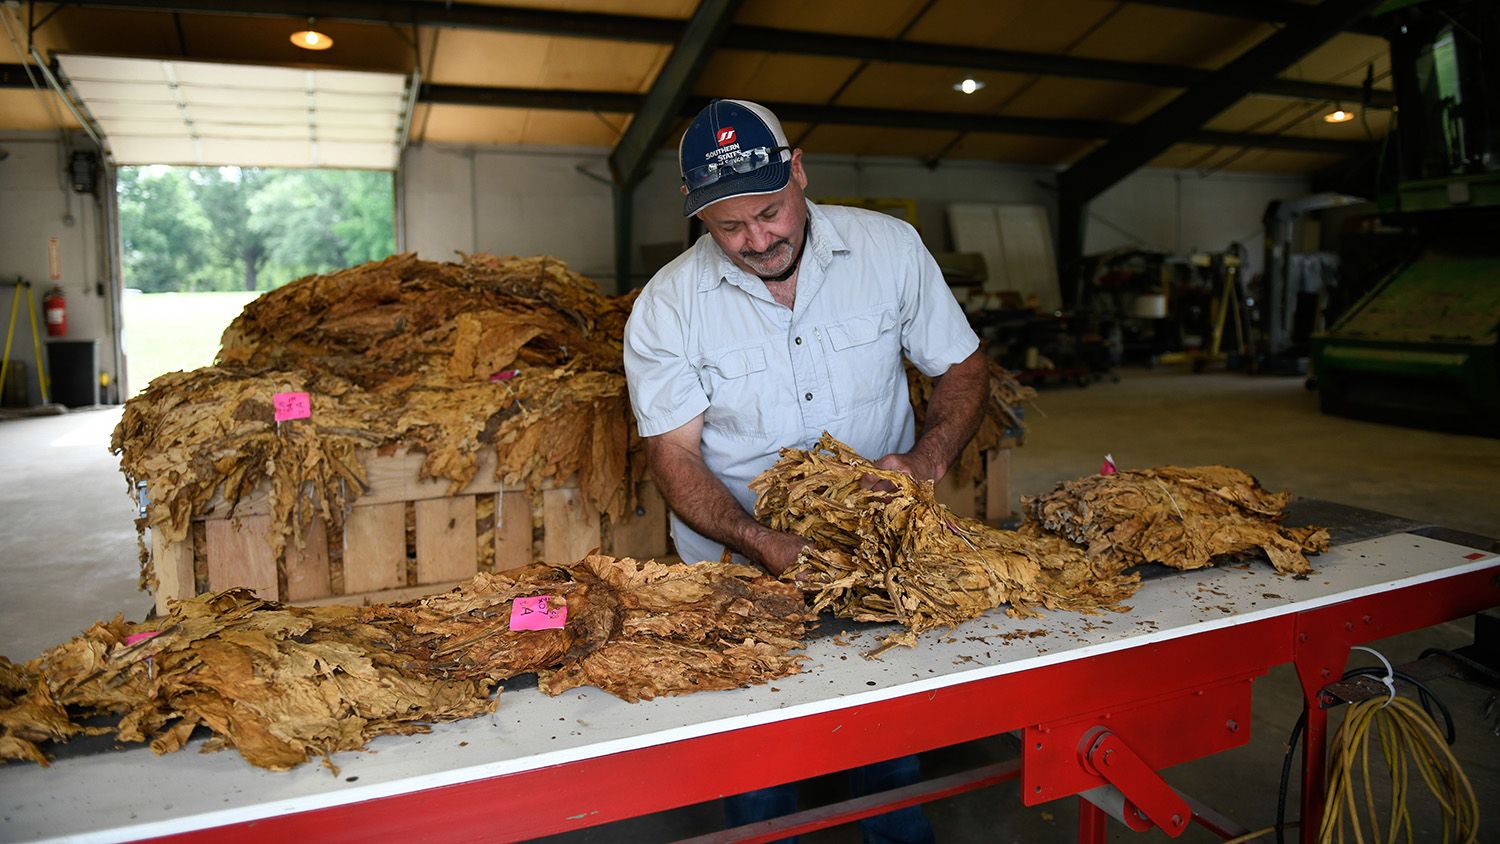 Researcher working with tobacco at Oxford Tobacco Research Station